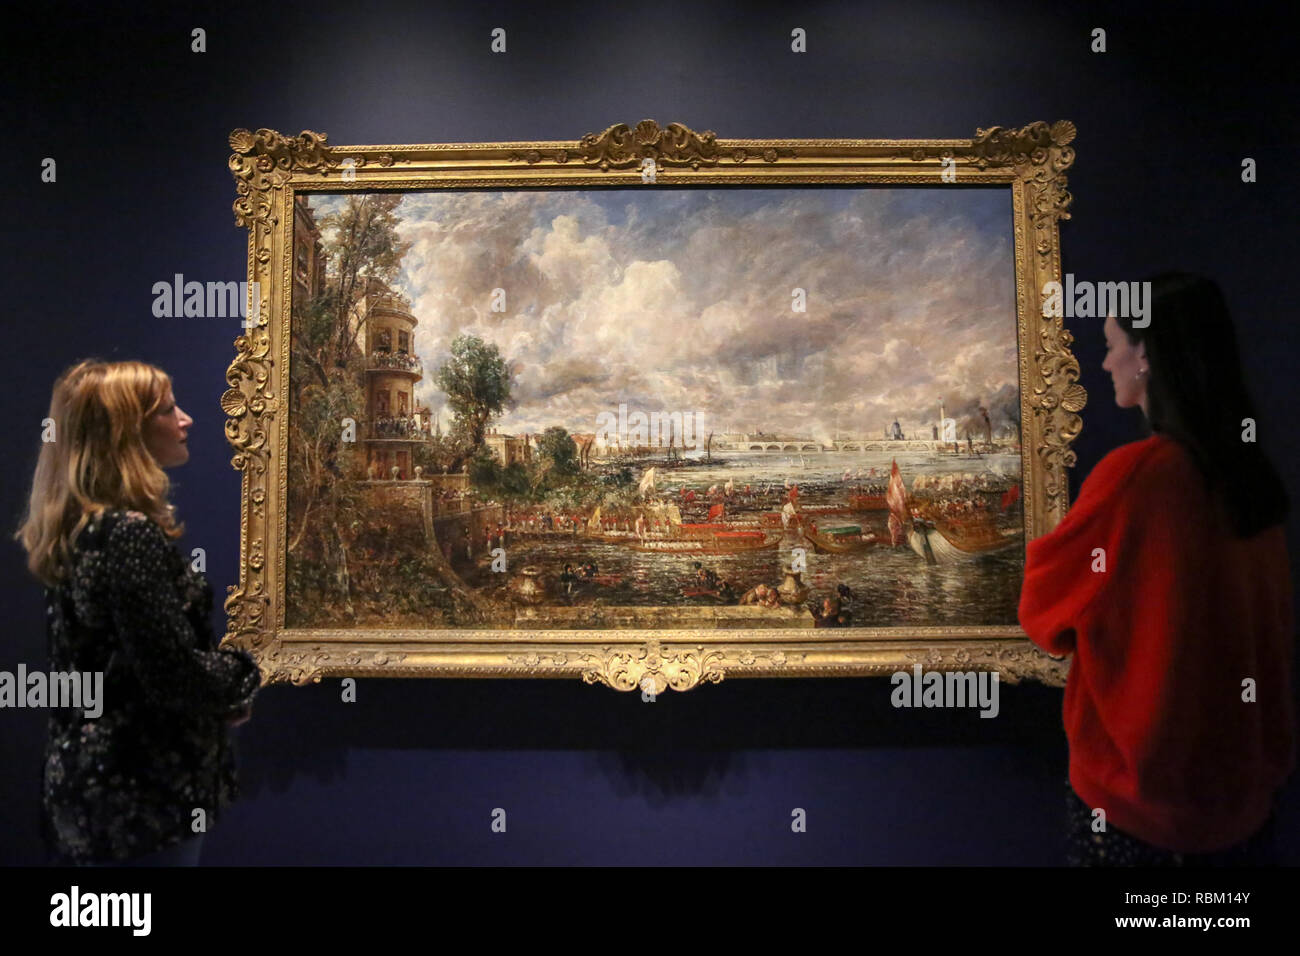 London, UK. 11th Jan, 2019. Staff members seen viewing a painting by John Constable.The Royal Academy Schools' most illustrious graduates, exhibits Helvoetsluys ('Helvoetsluys; - the City of Utrecht, 64, going to sea') 1832 by J.M.W. Turner (1775-1851) and The opening of Waterloo Bridge ('Waterloo Bridge, from the Whitehall Stairs, 18th June 1817) by John Constable (1776-1837), in, are-telling of one of the most legendary events in the history of the Summer Exhibition, it toke place at the Royal Academy of Arts. The two paintings were reunited for the first time since the Stock Photo